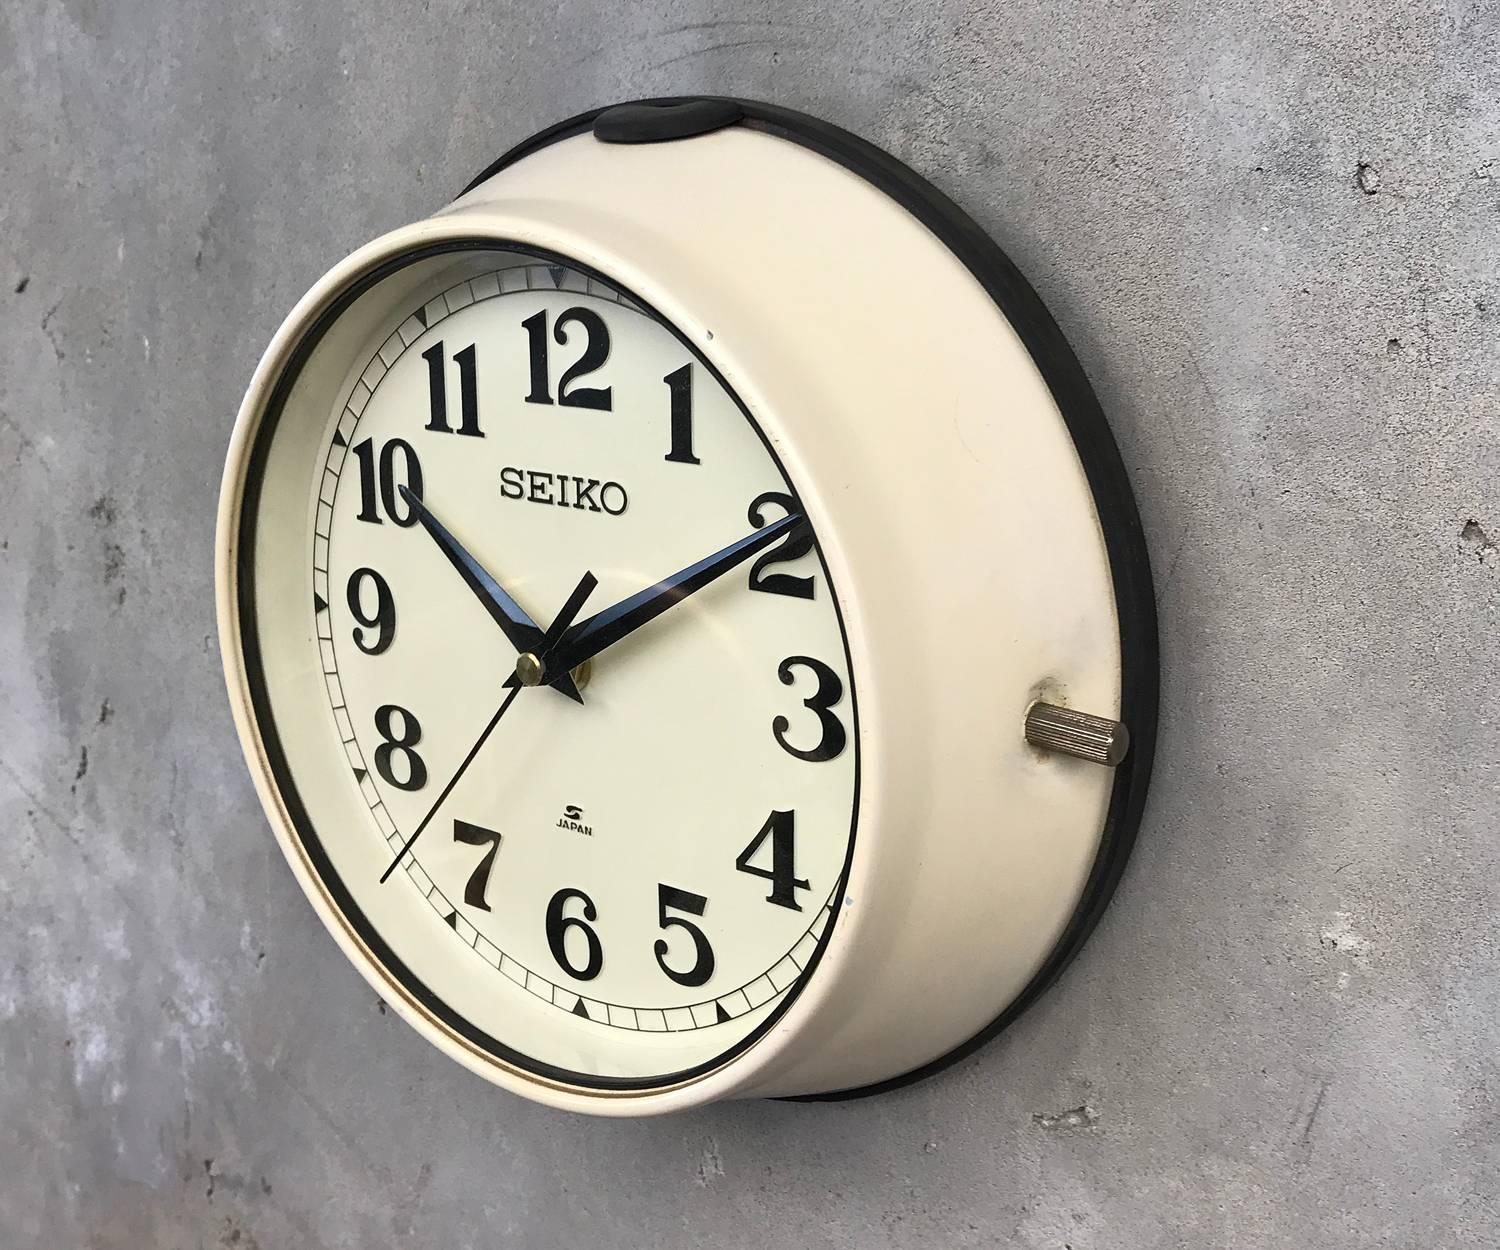 Seiko supertanker slave clock. 

A reclaimed and restored marine slave clock.

These clock were used in great number on large sea going vessels built during the 1970's and housed a movement that would be controlled by a master clock.

We have